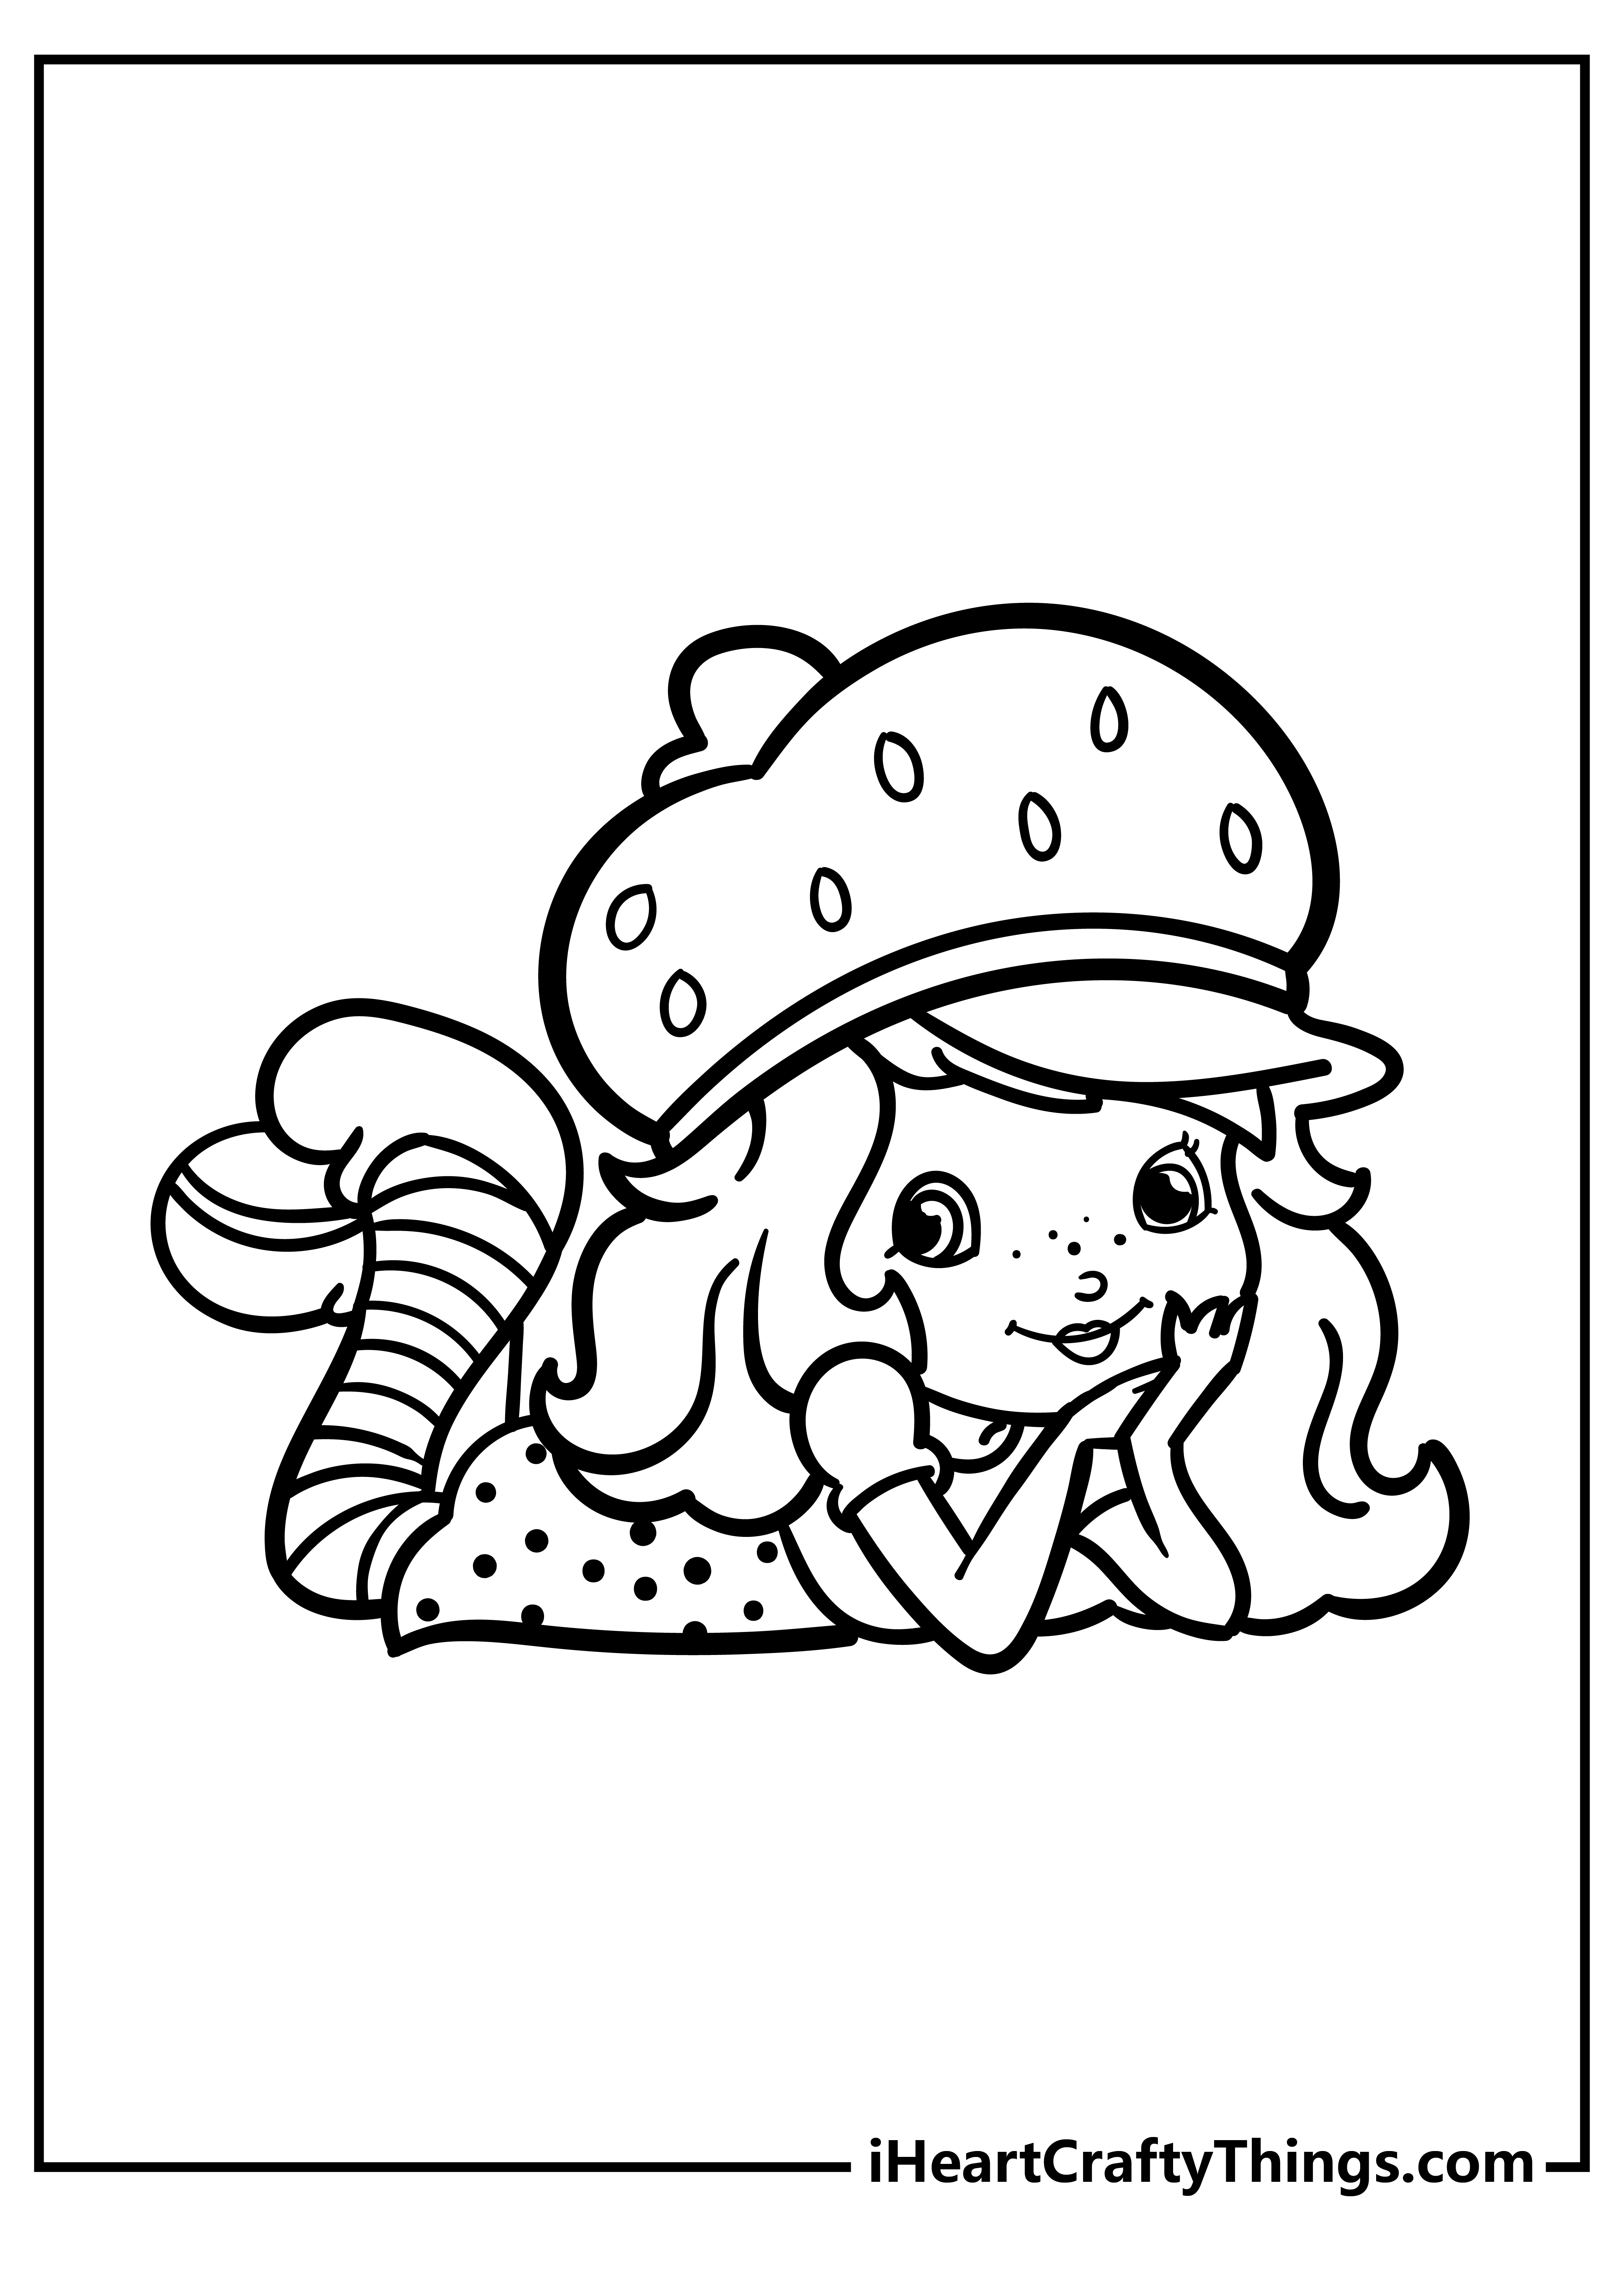 Strawberry shortcake coloring pages free printables